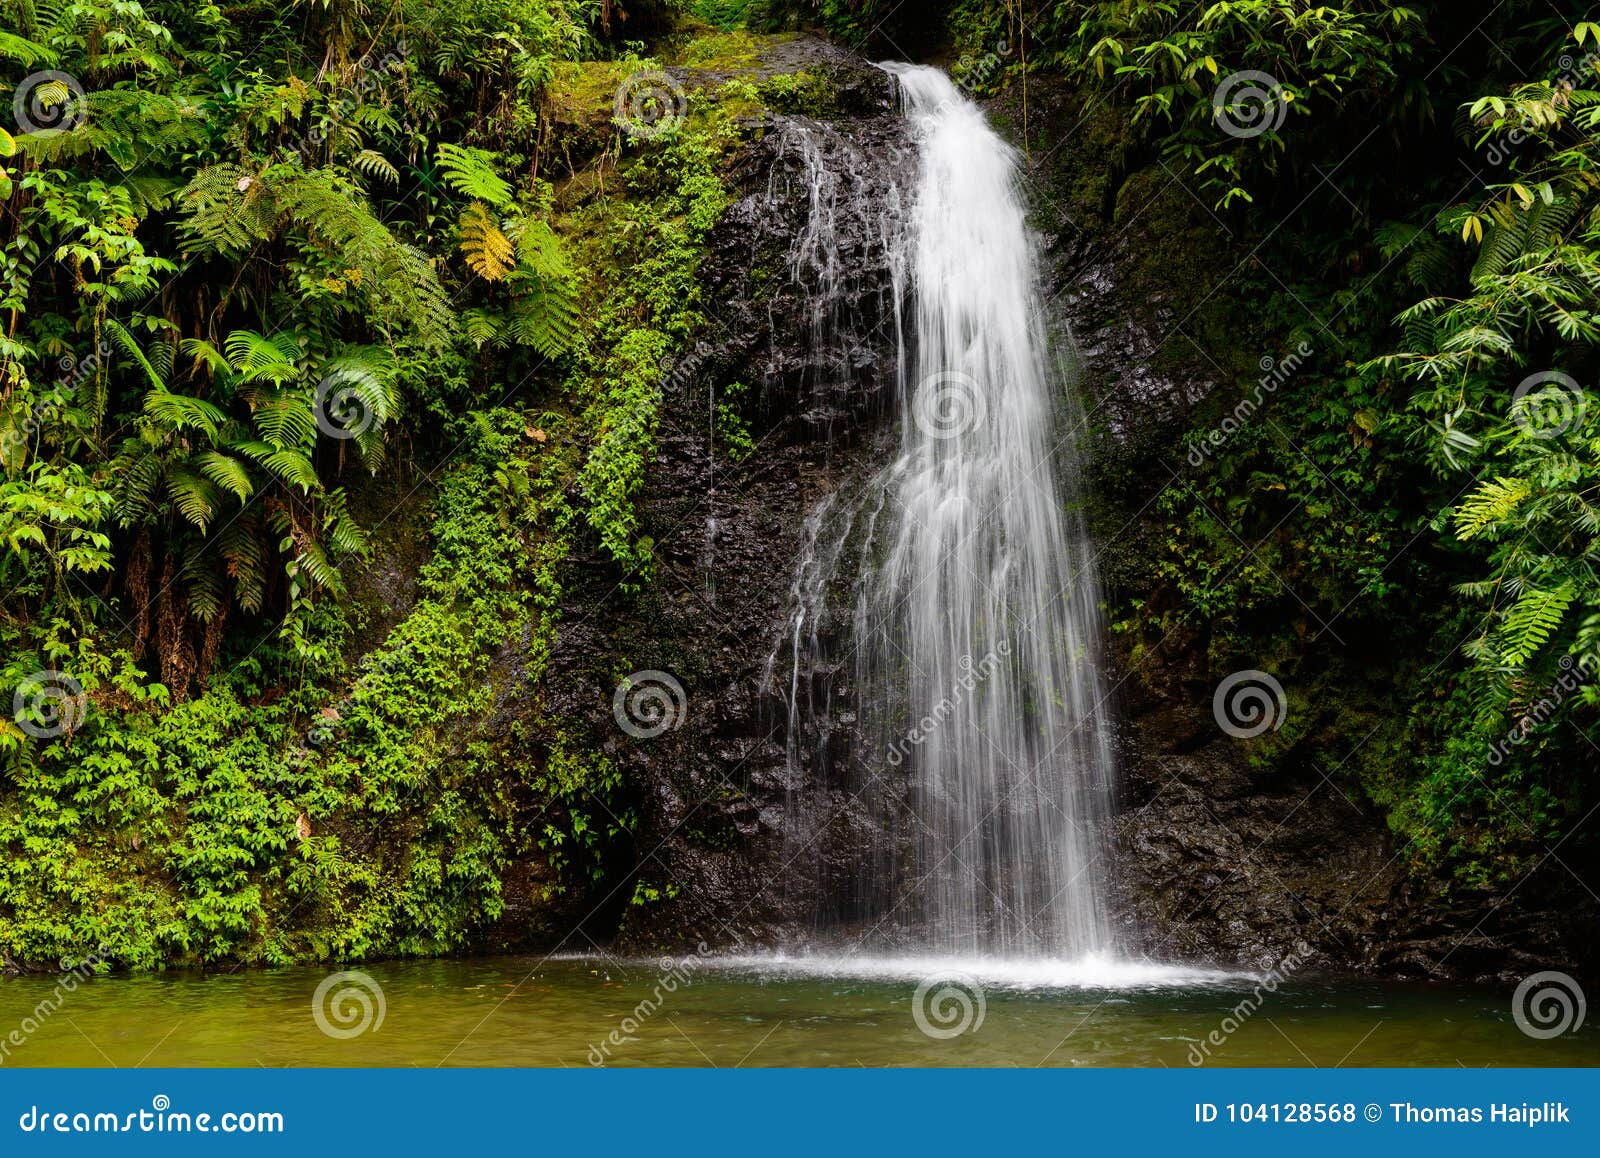 waterfall in the rainforest of martinique